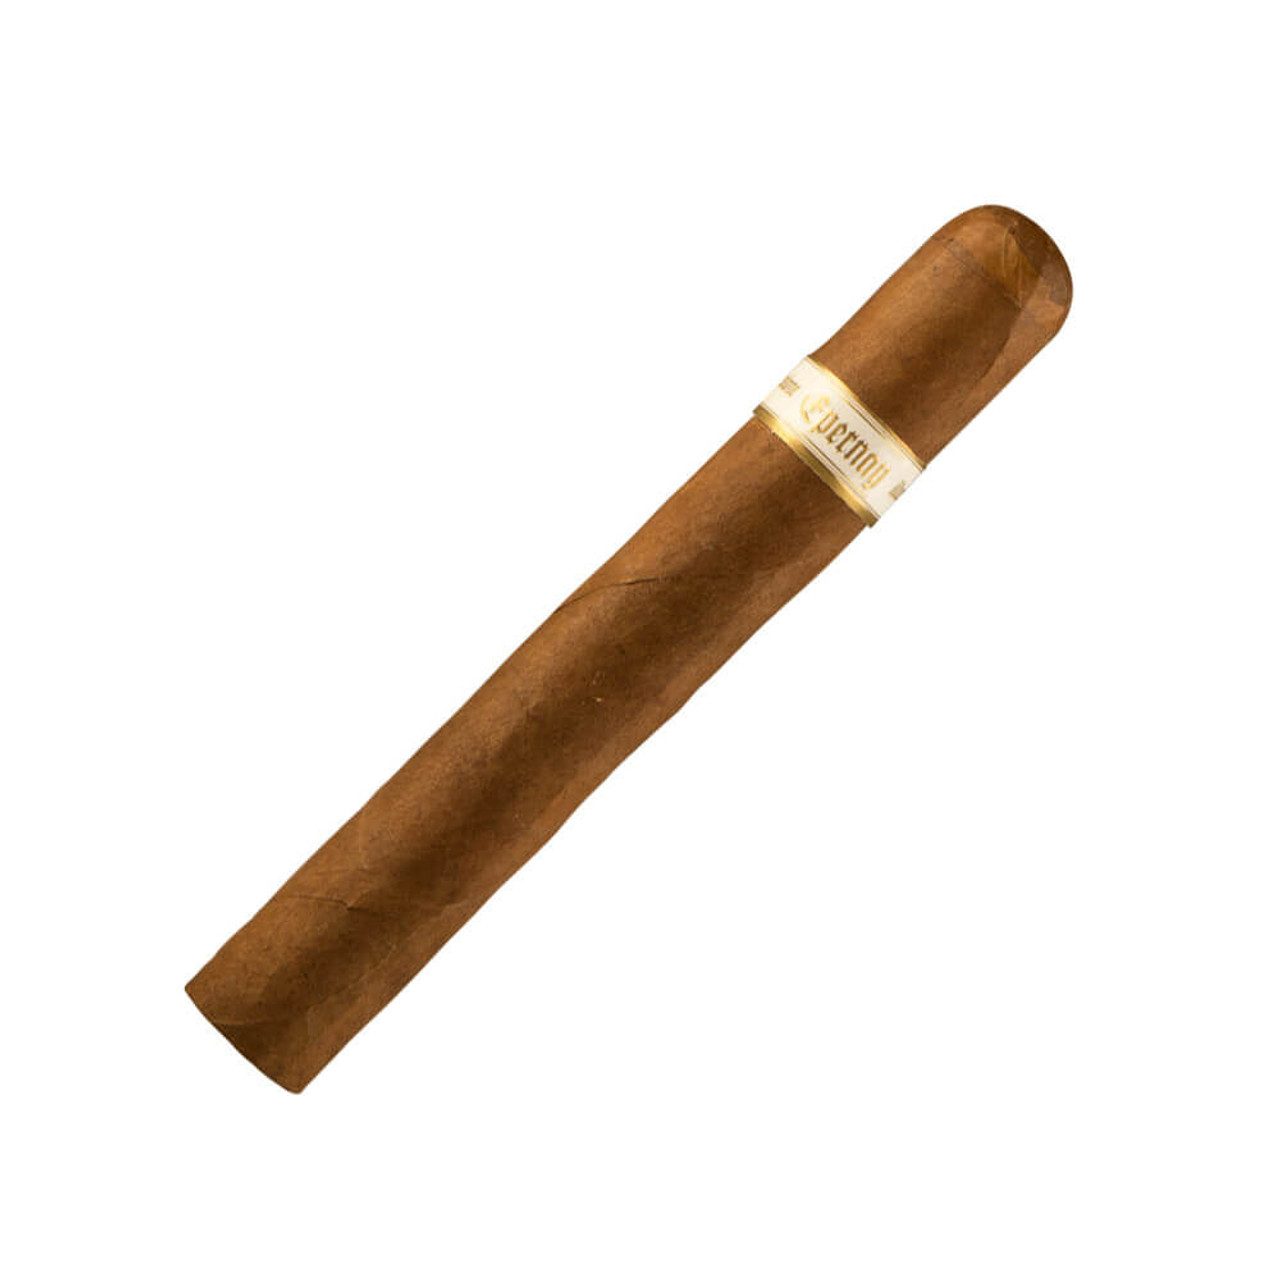 Illusione Epernay Le Ferme Cigars - 5.14 x 48 (Box of 25)